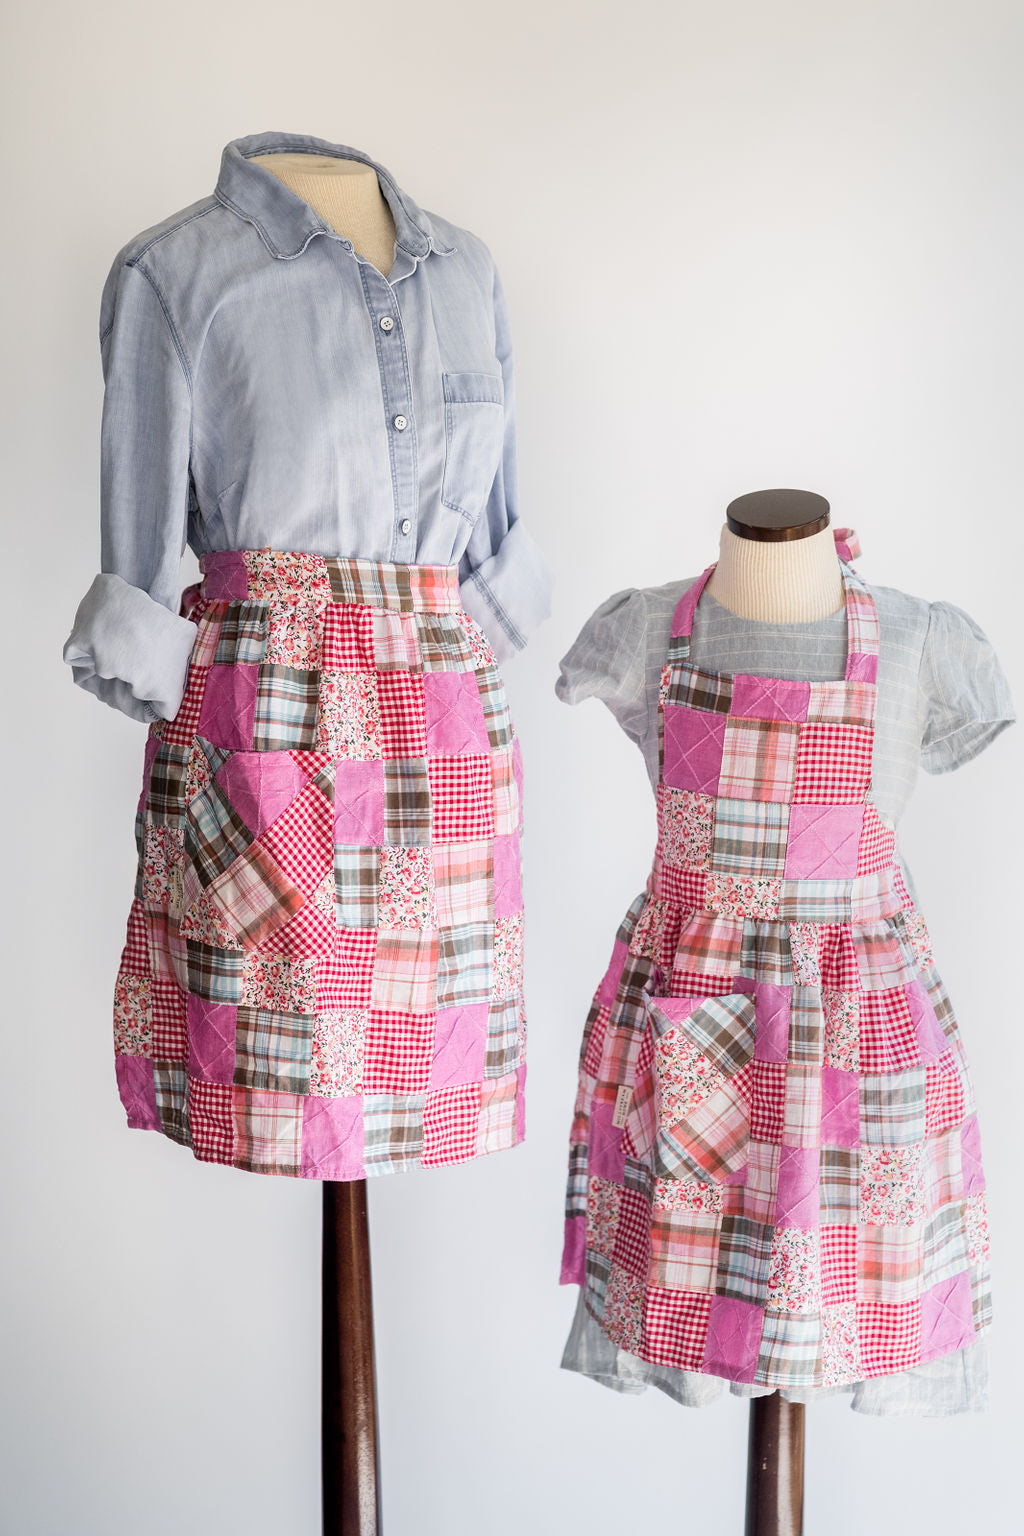 The Child's Quilted Patchwork Apron on a Mannequin